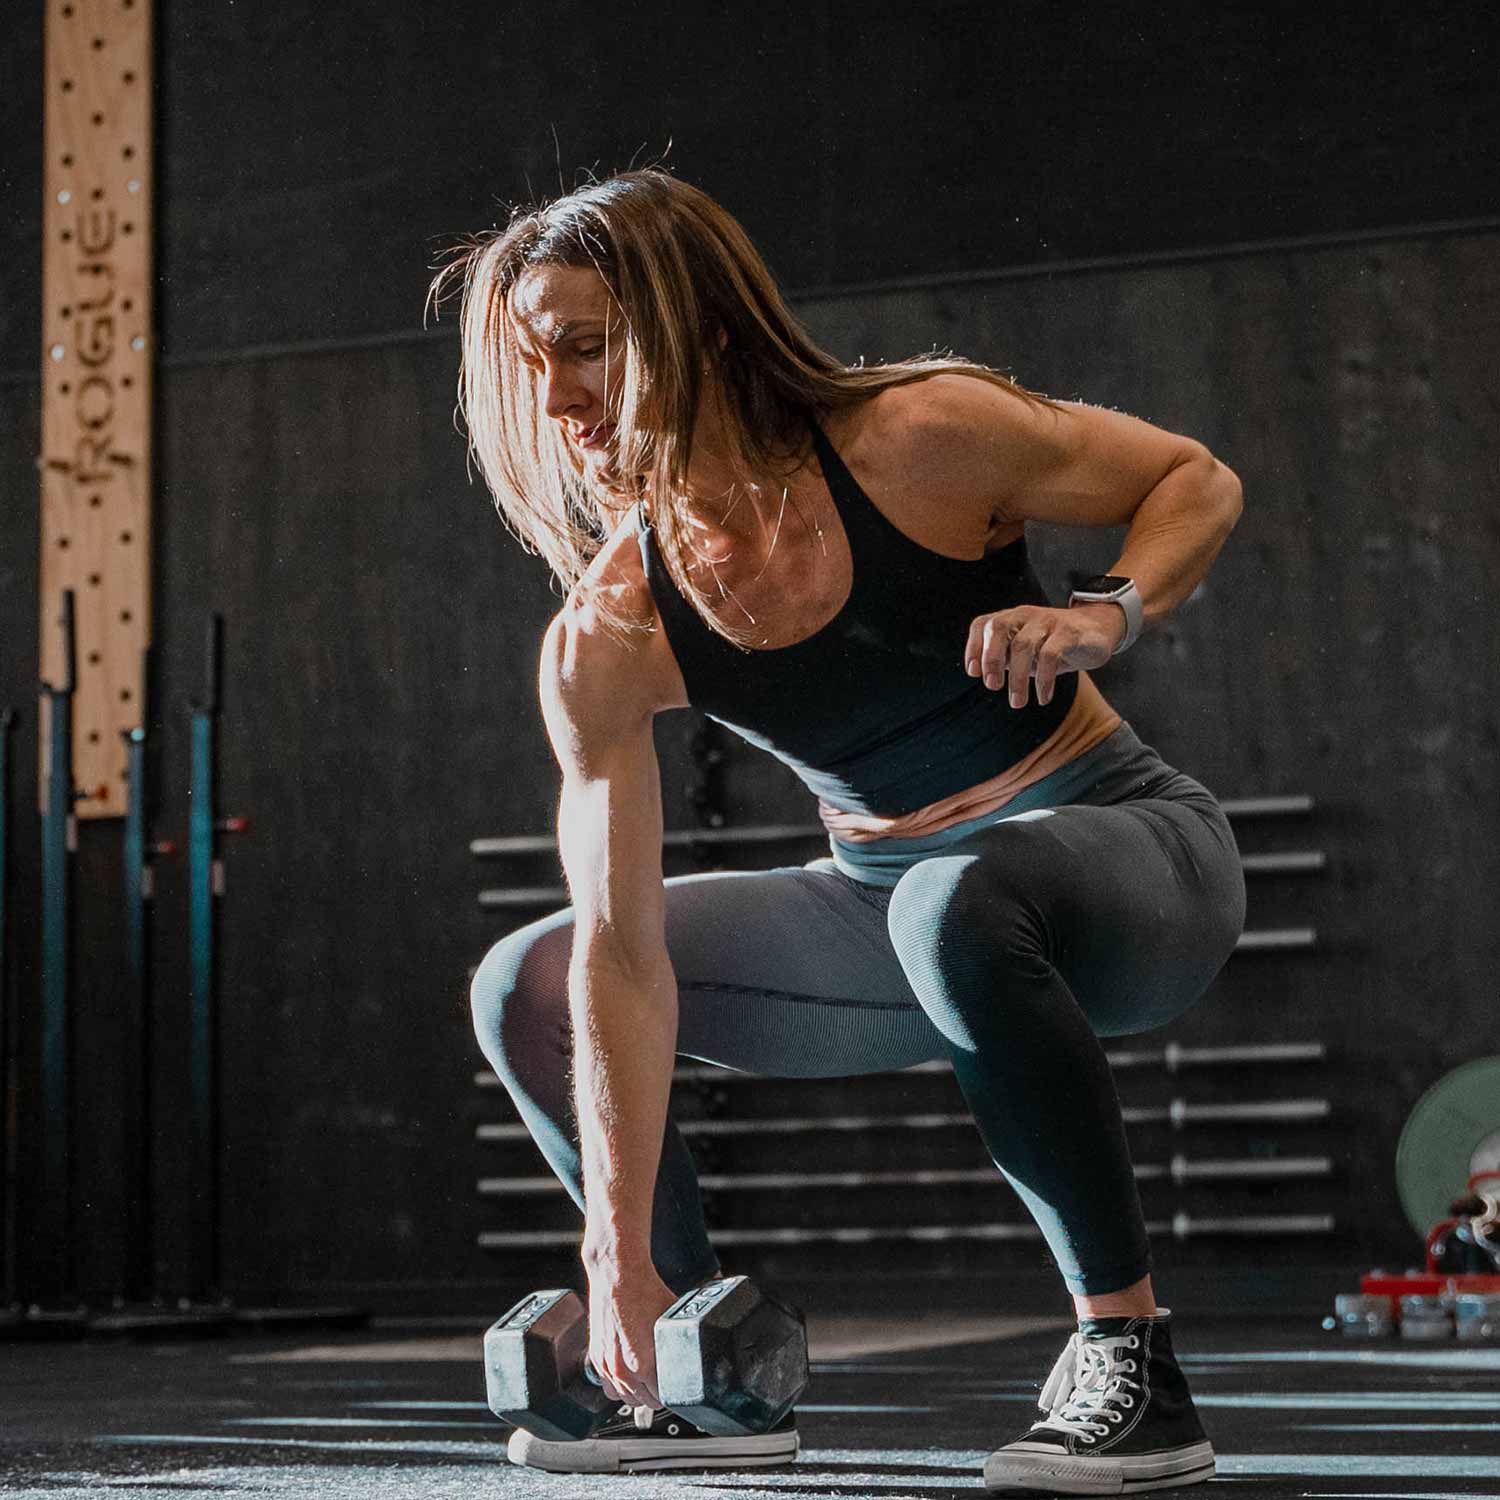 Muscular woman lifting a dumbbell in Calgary